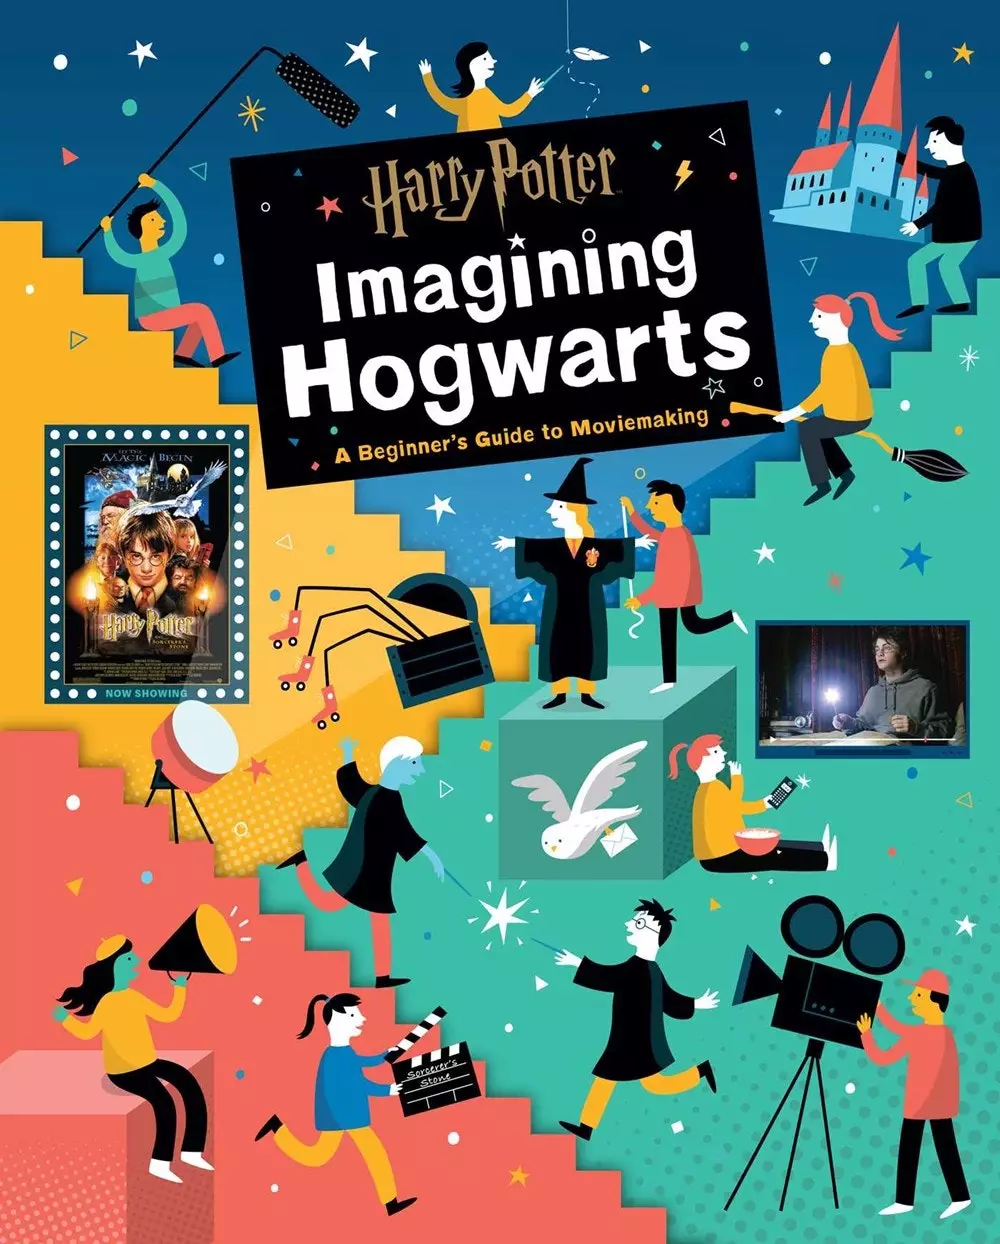 Learn how to make a Harry Potter movie.